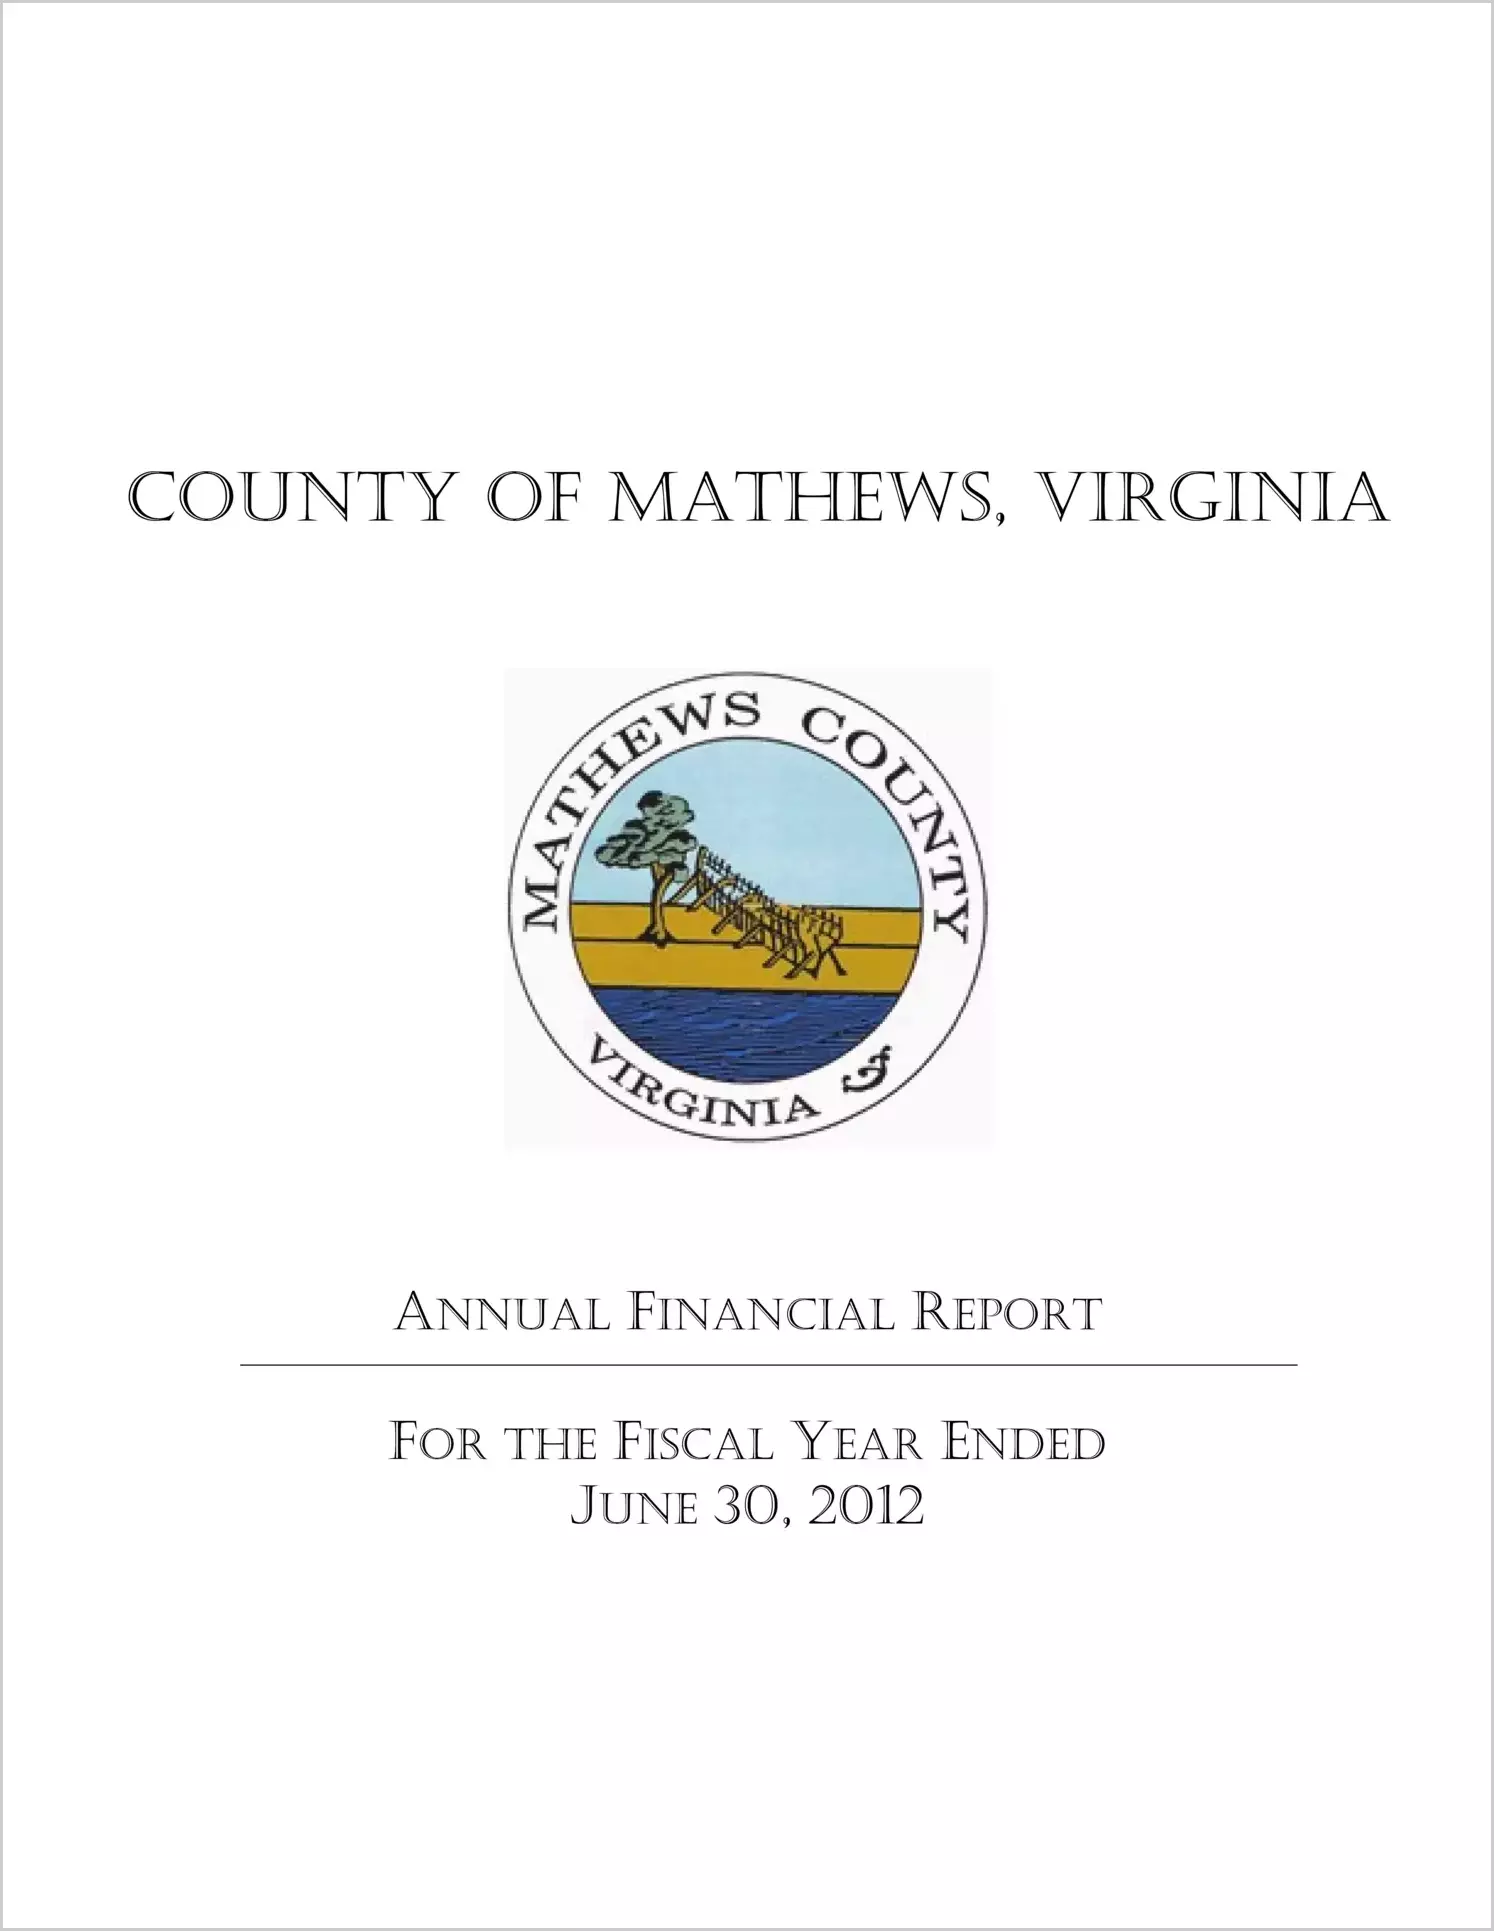 2012 Annual Financial Report for County of Mathews